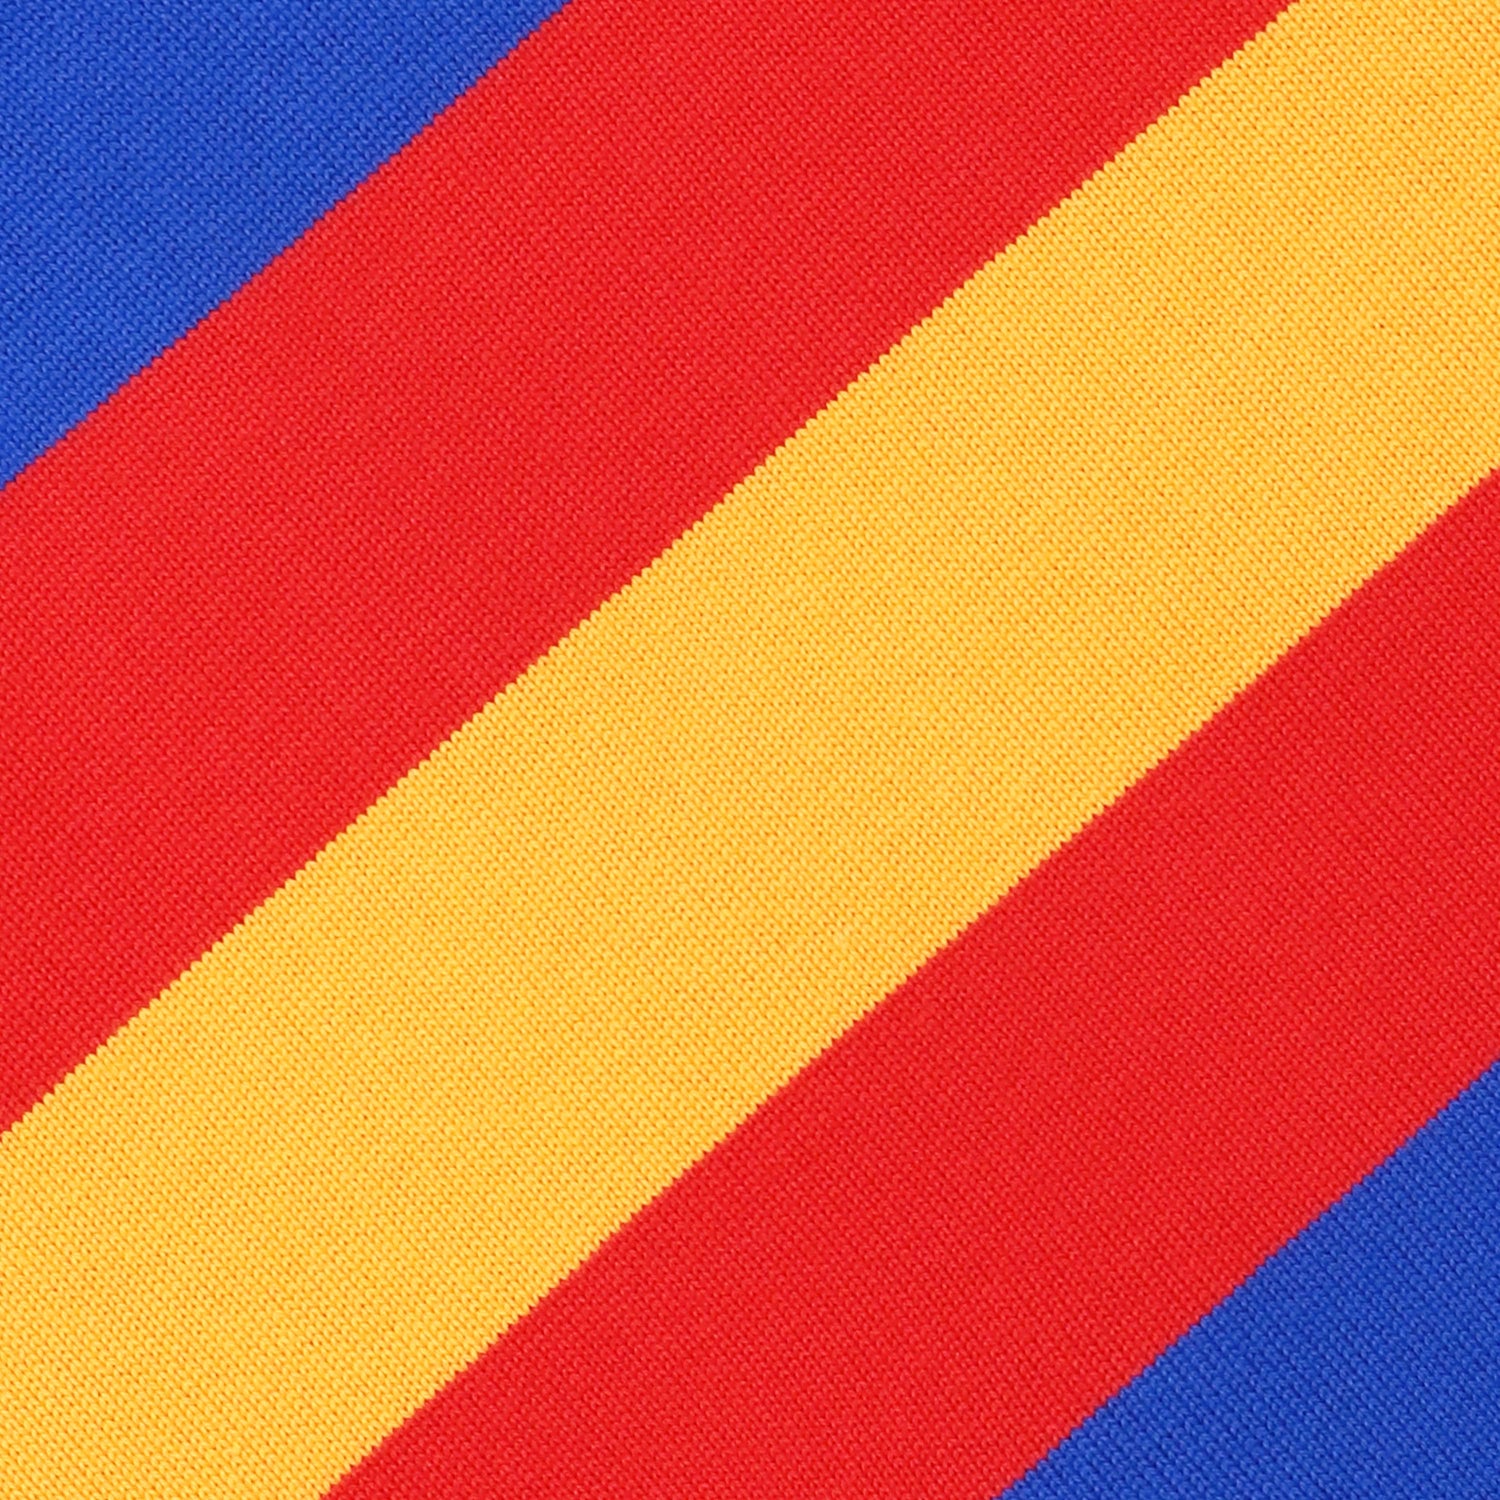 Detail image of blue rugby jersey with red and yellow stripes.